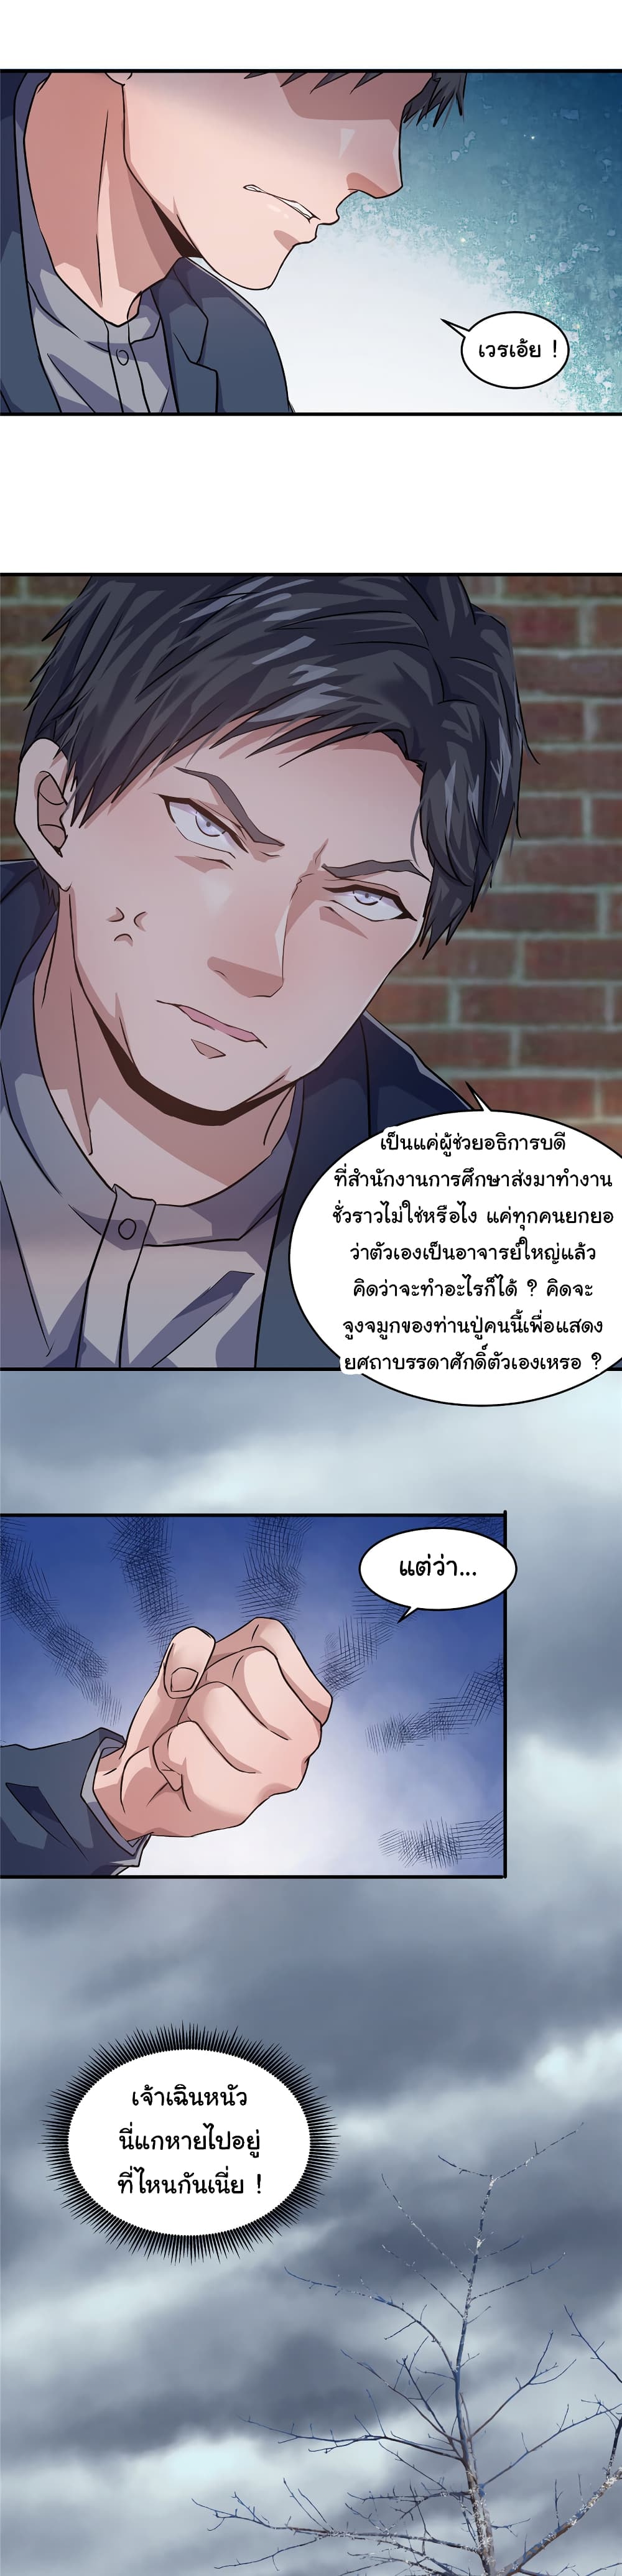 Live Steadily, Donโ€t Wave เธ•เธญเธเธ—เธตเน 16 (19)